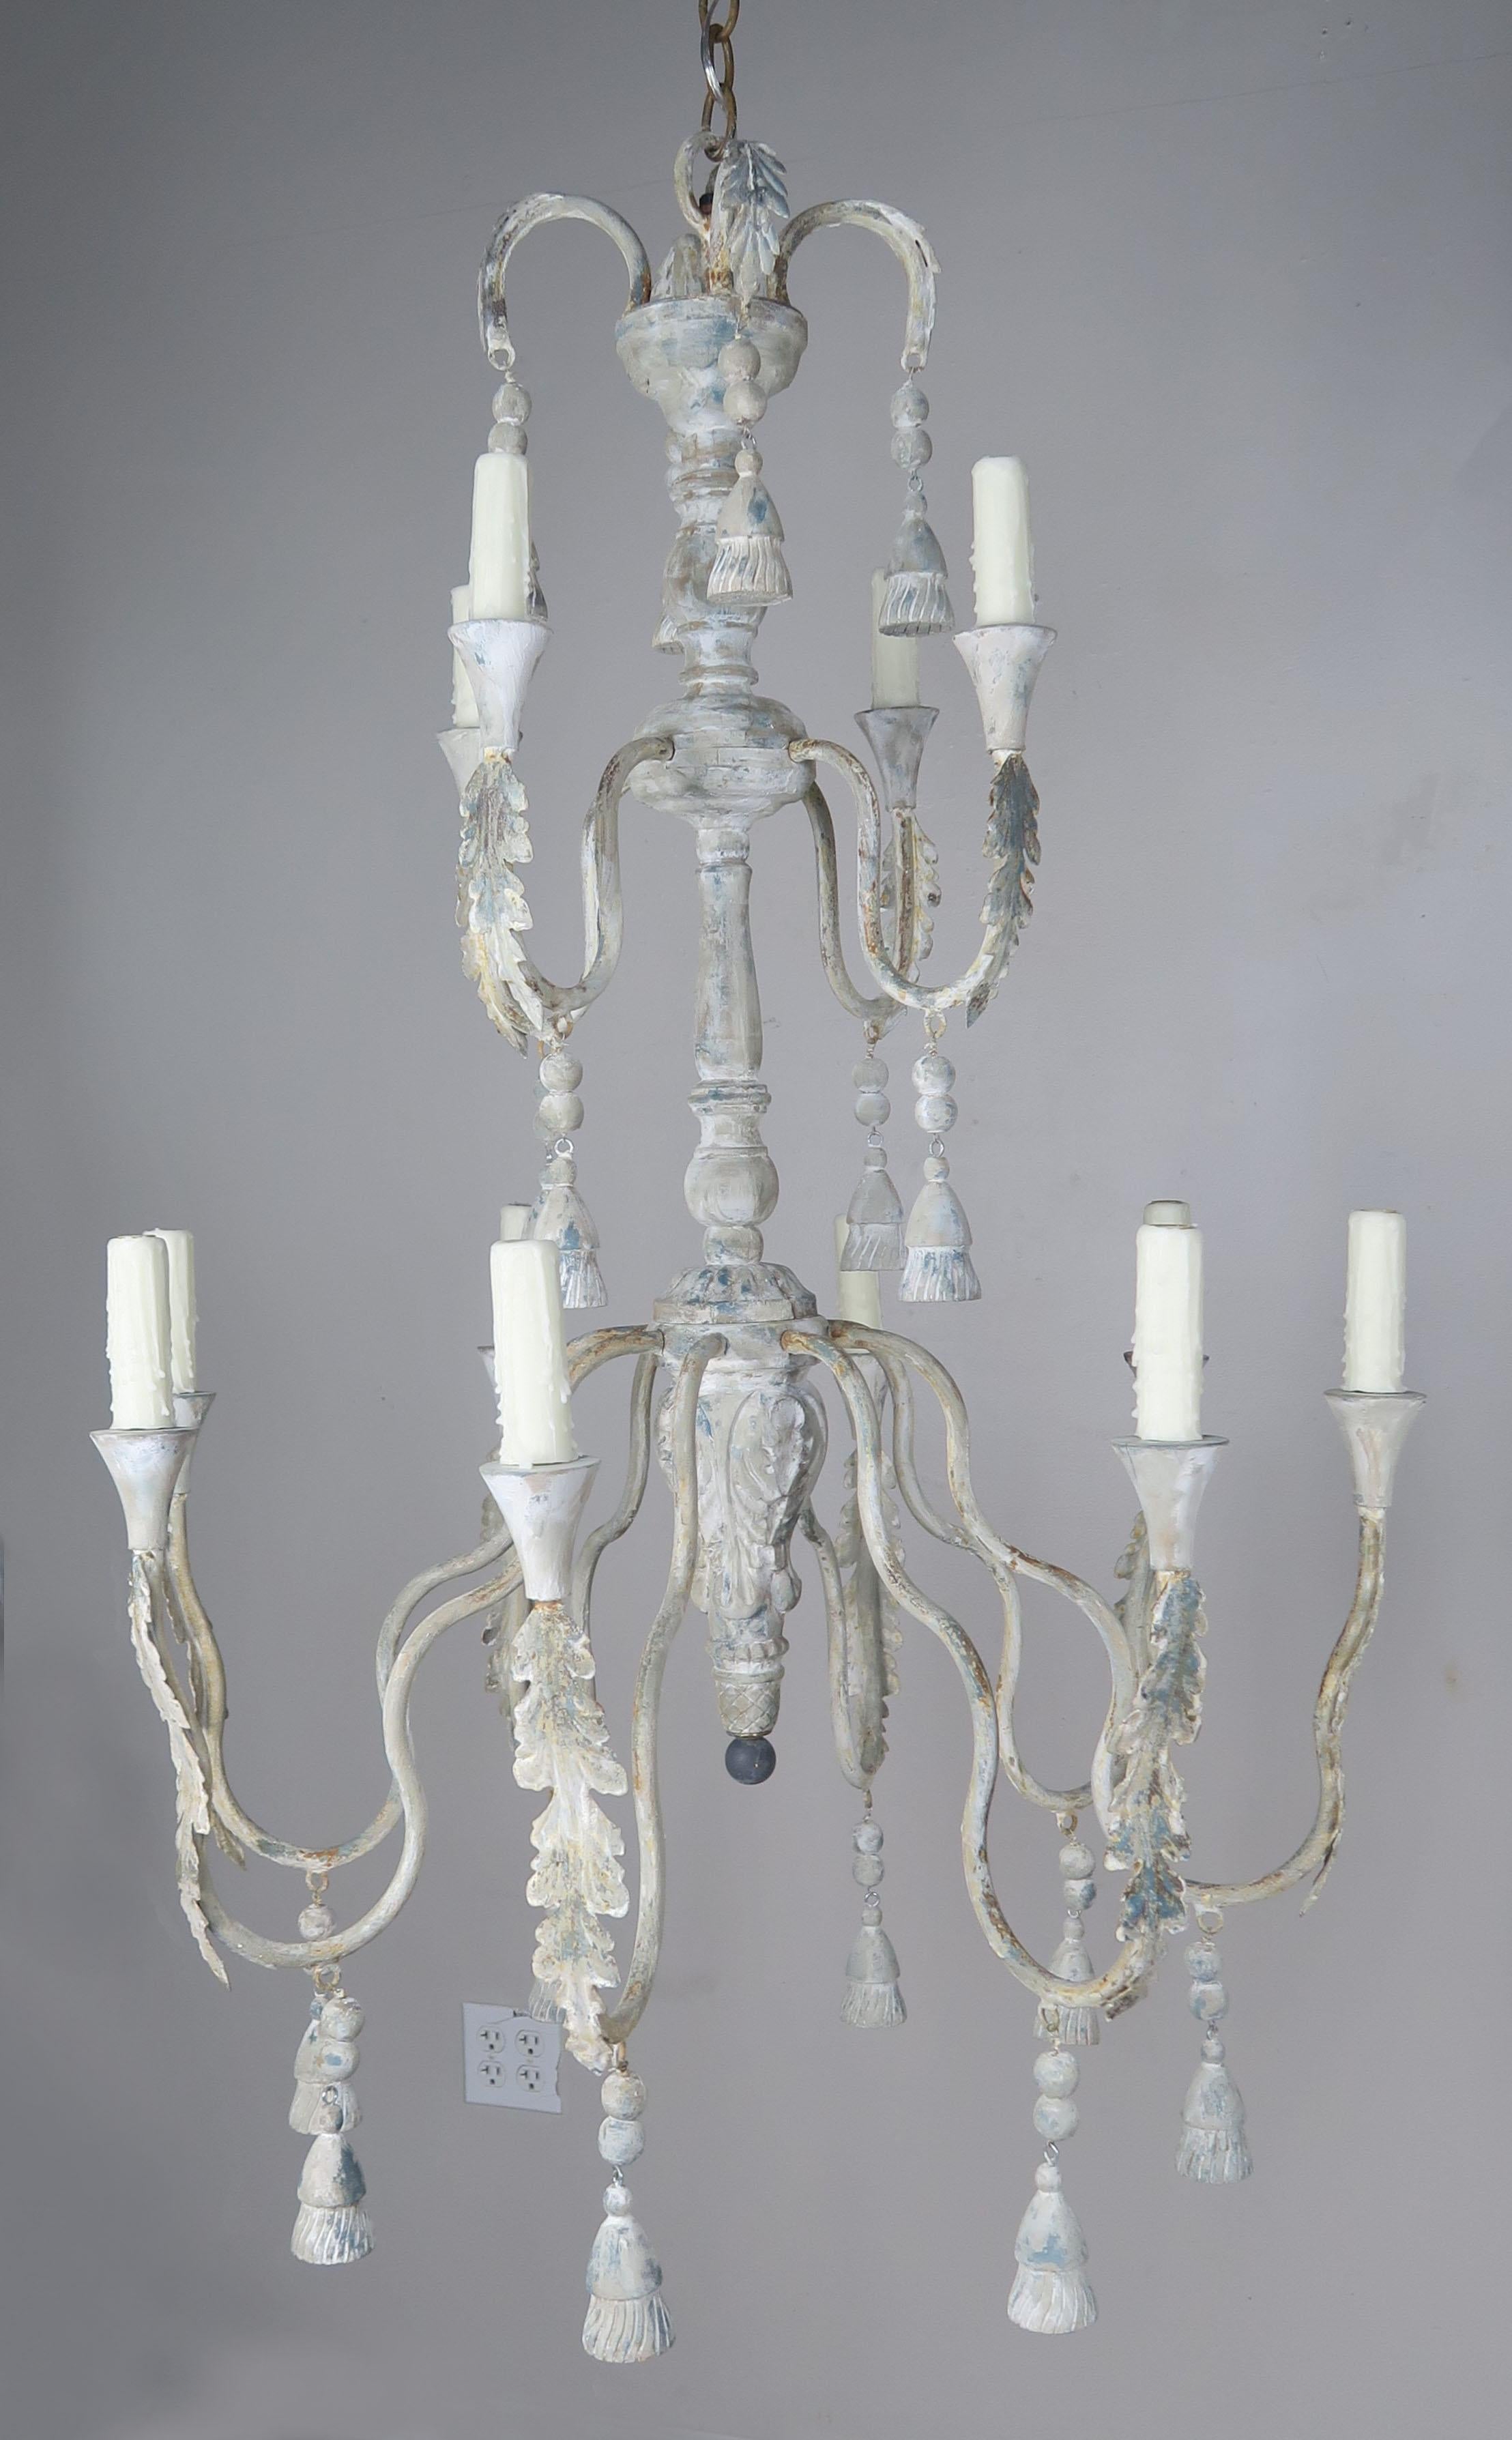 Pair of Italian two-tier twelve-light Italian style painted chandeliers with carved wood tassels and beads throughout. The paint on the fixtures is beautifully worn with an antique colored cream base and remnants of soft blue paint, rust and natural